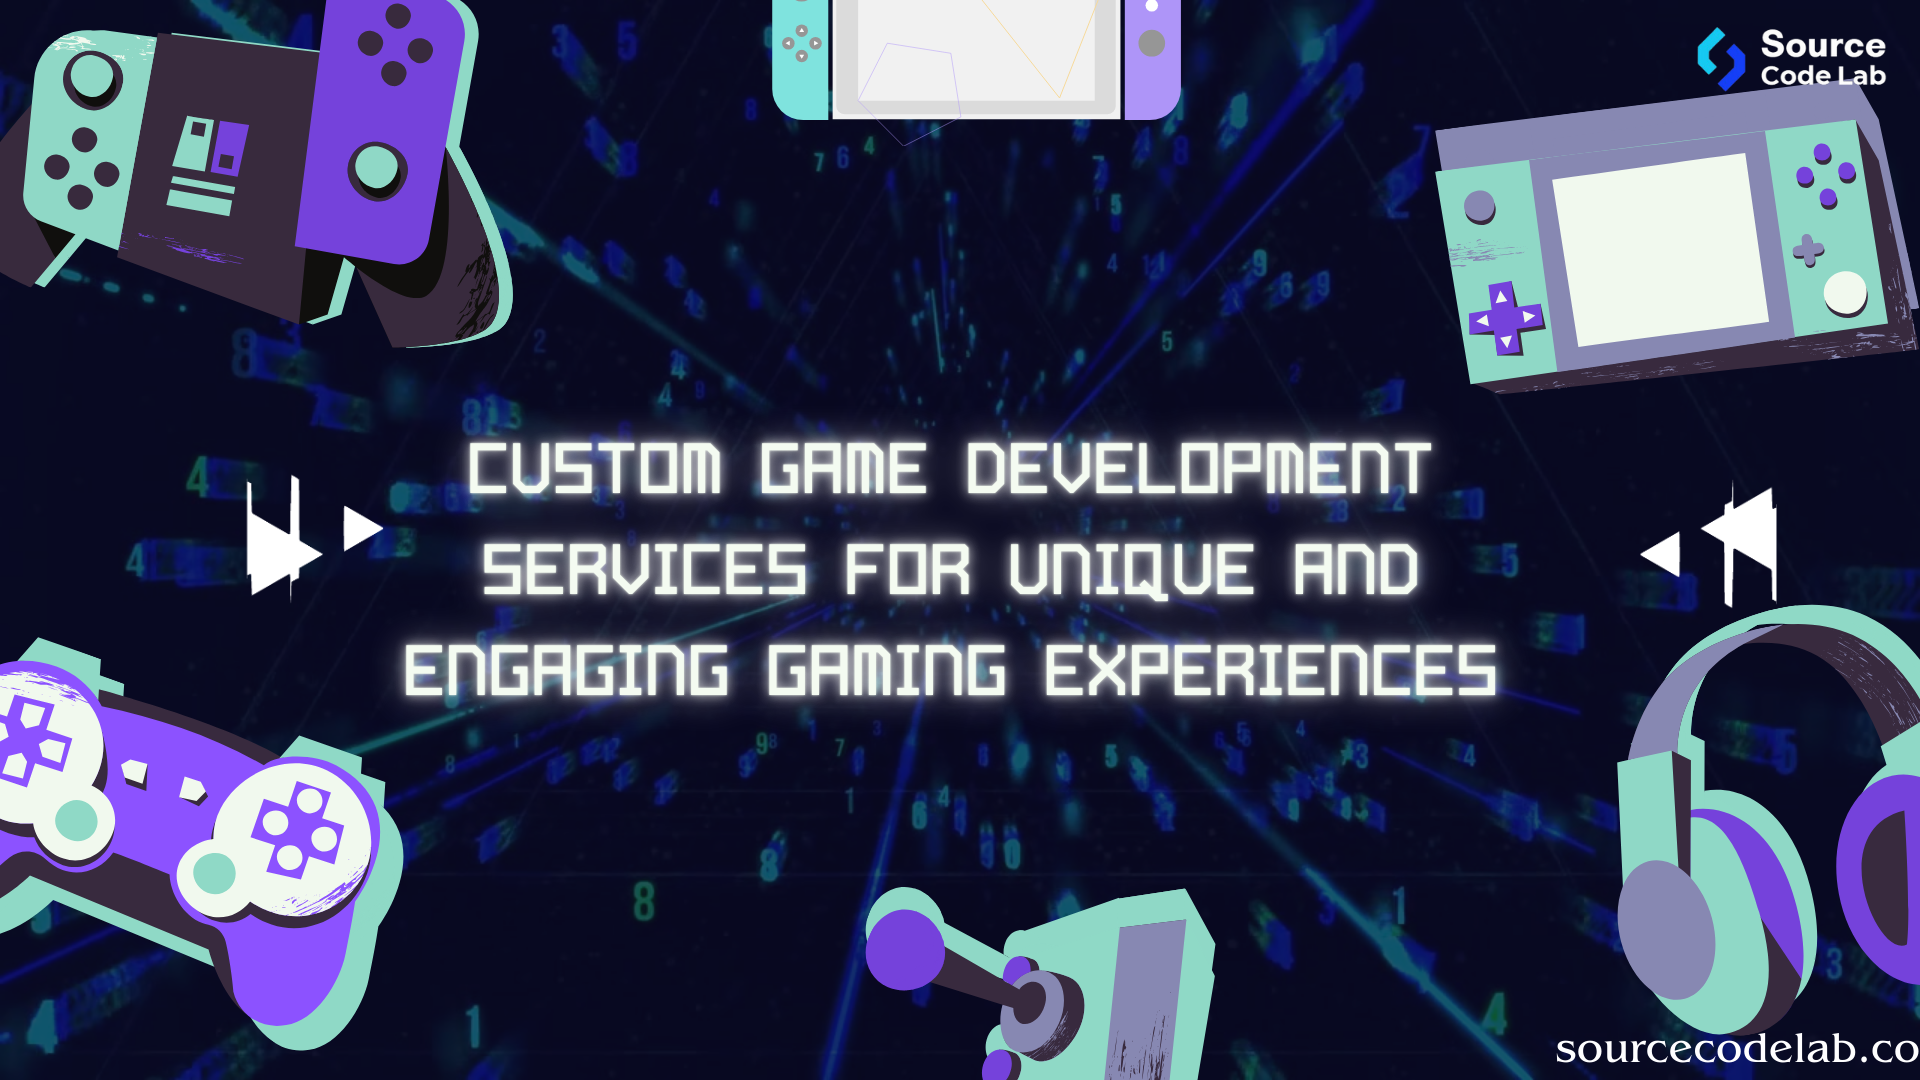 Custom Game Development Services for Unique and Engaging Gaming Experiences